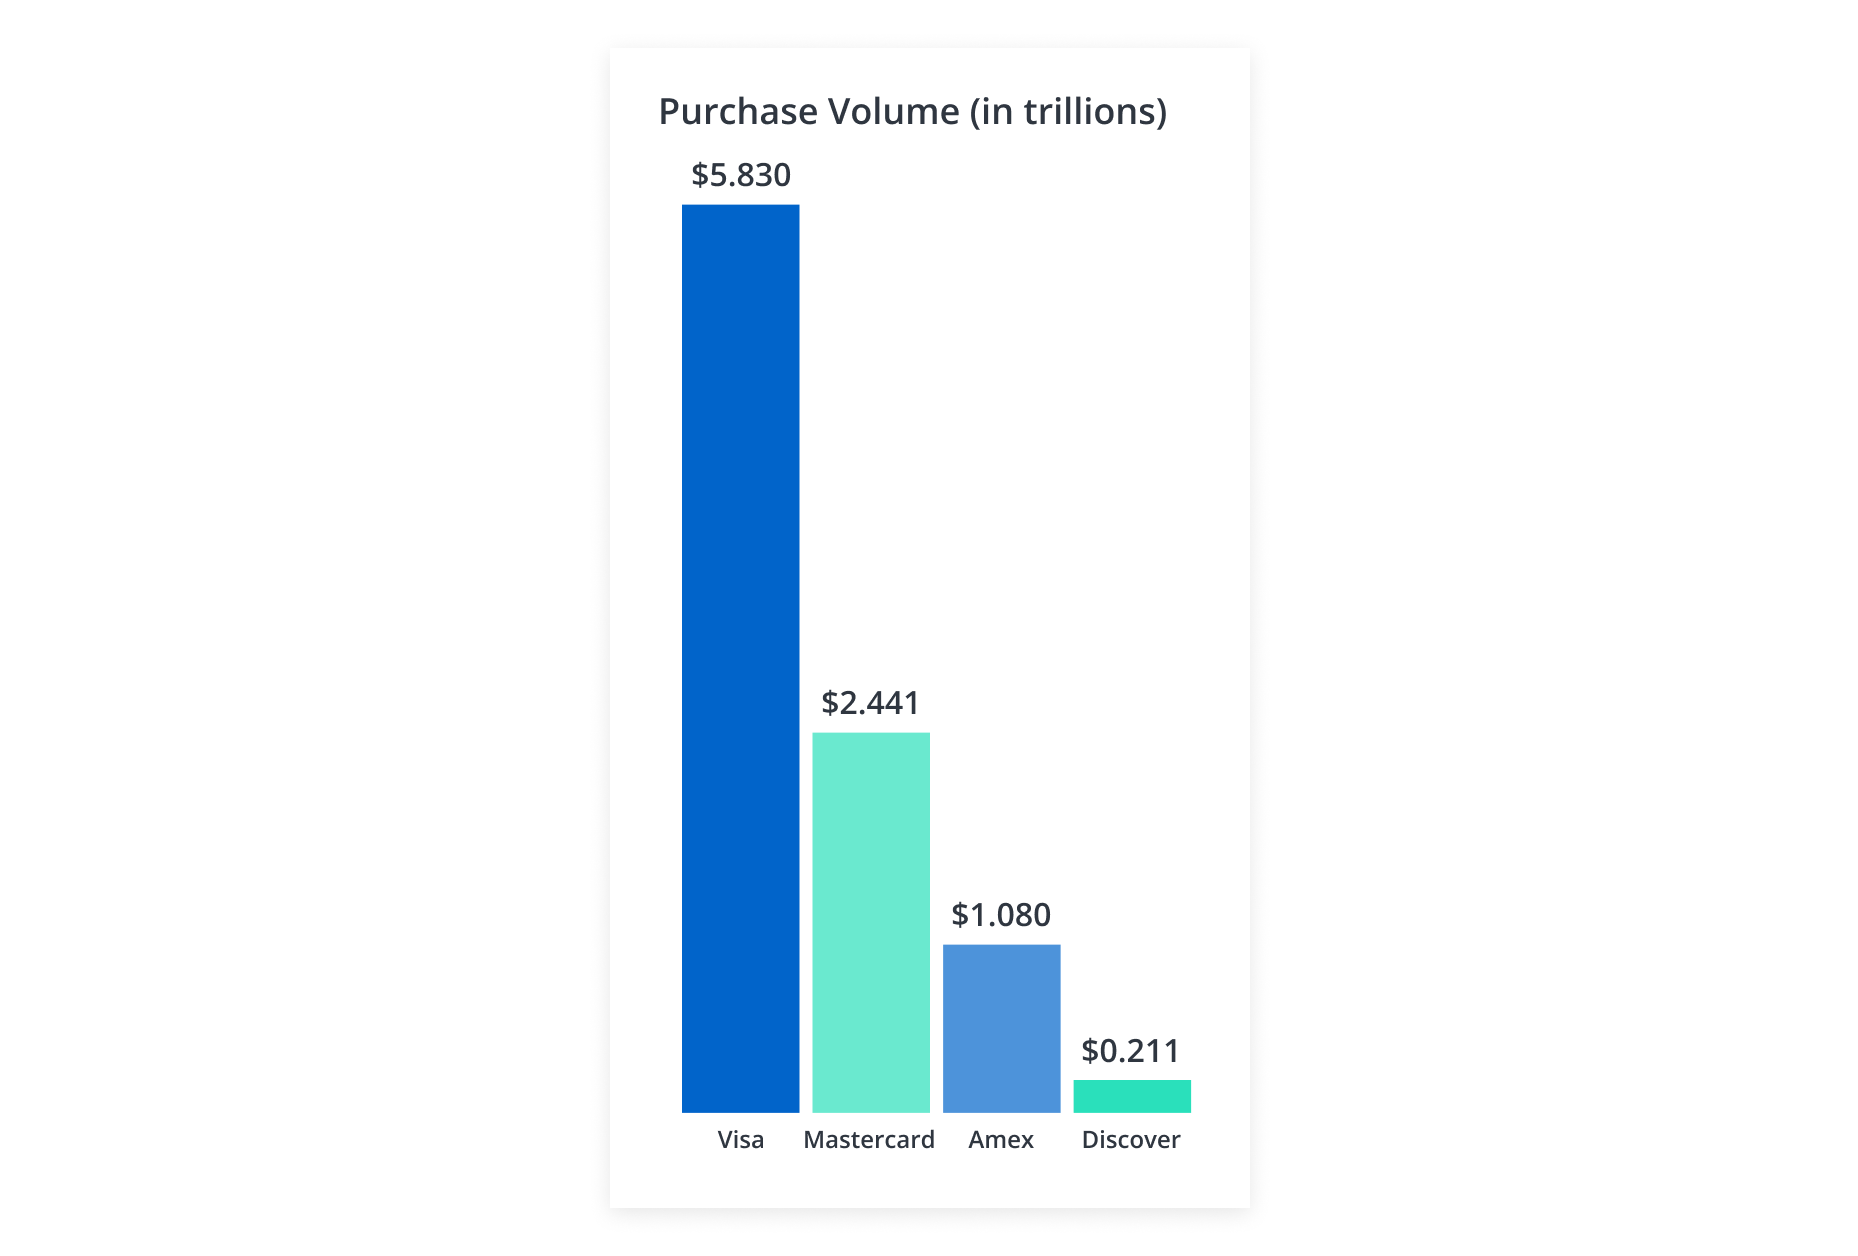 Purchase volume for Visa, Mastercard, AmEx, and Discover 2022